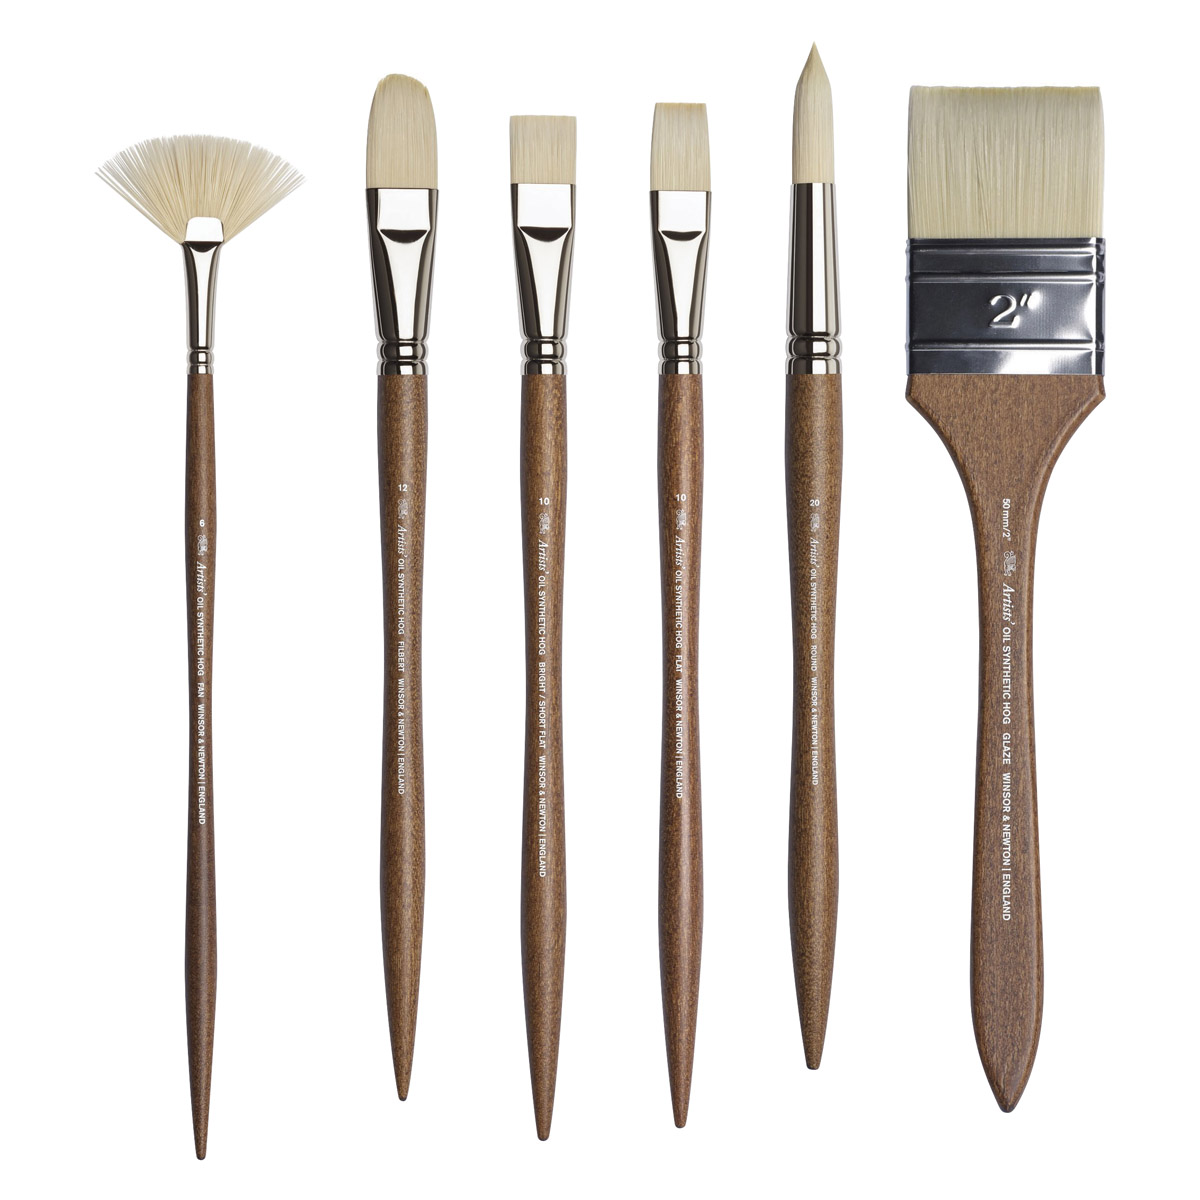 Synthetic Oil Brushes - Oil Painting Brushes - Brushes & Tools